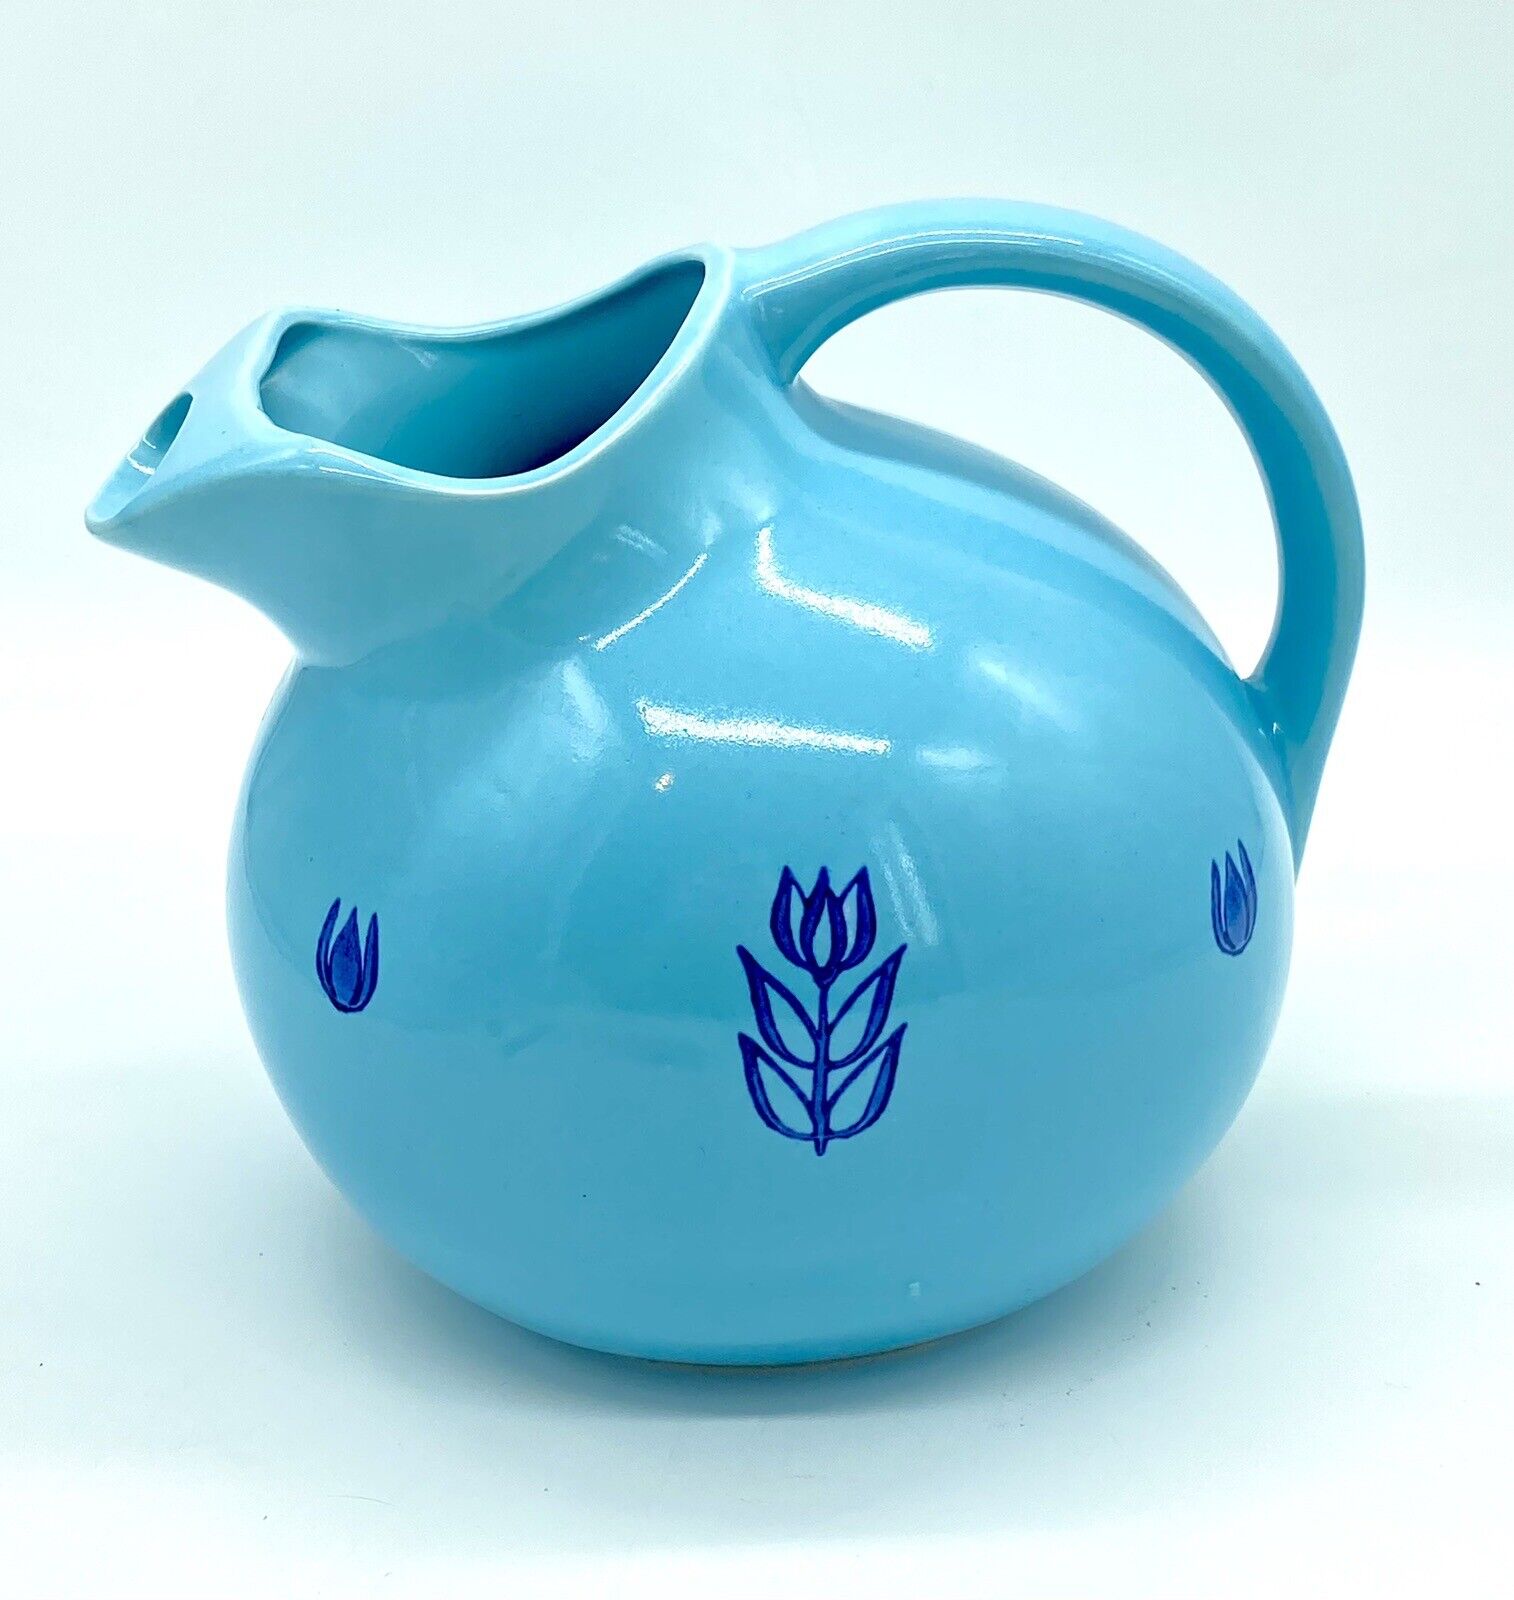 Vintage 1950s Dutch Blue By Cameron Clay Product Pitcher Tulip 7” Round USA